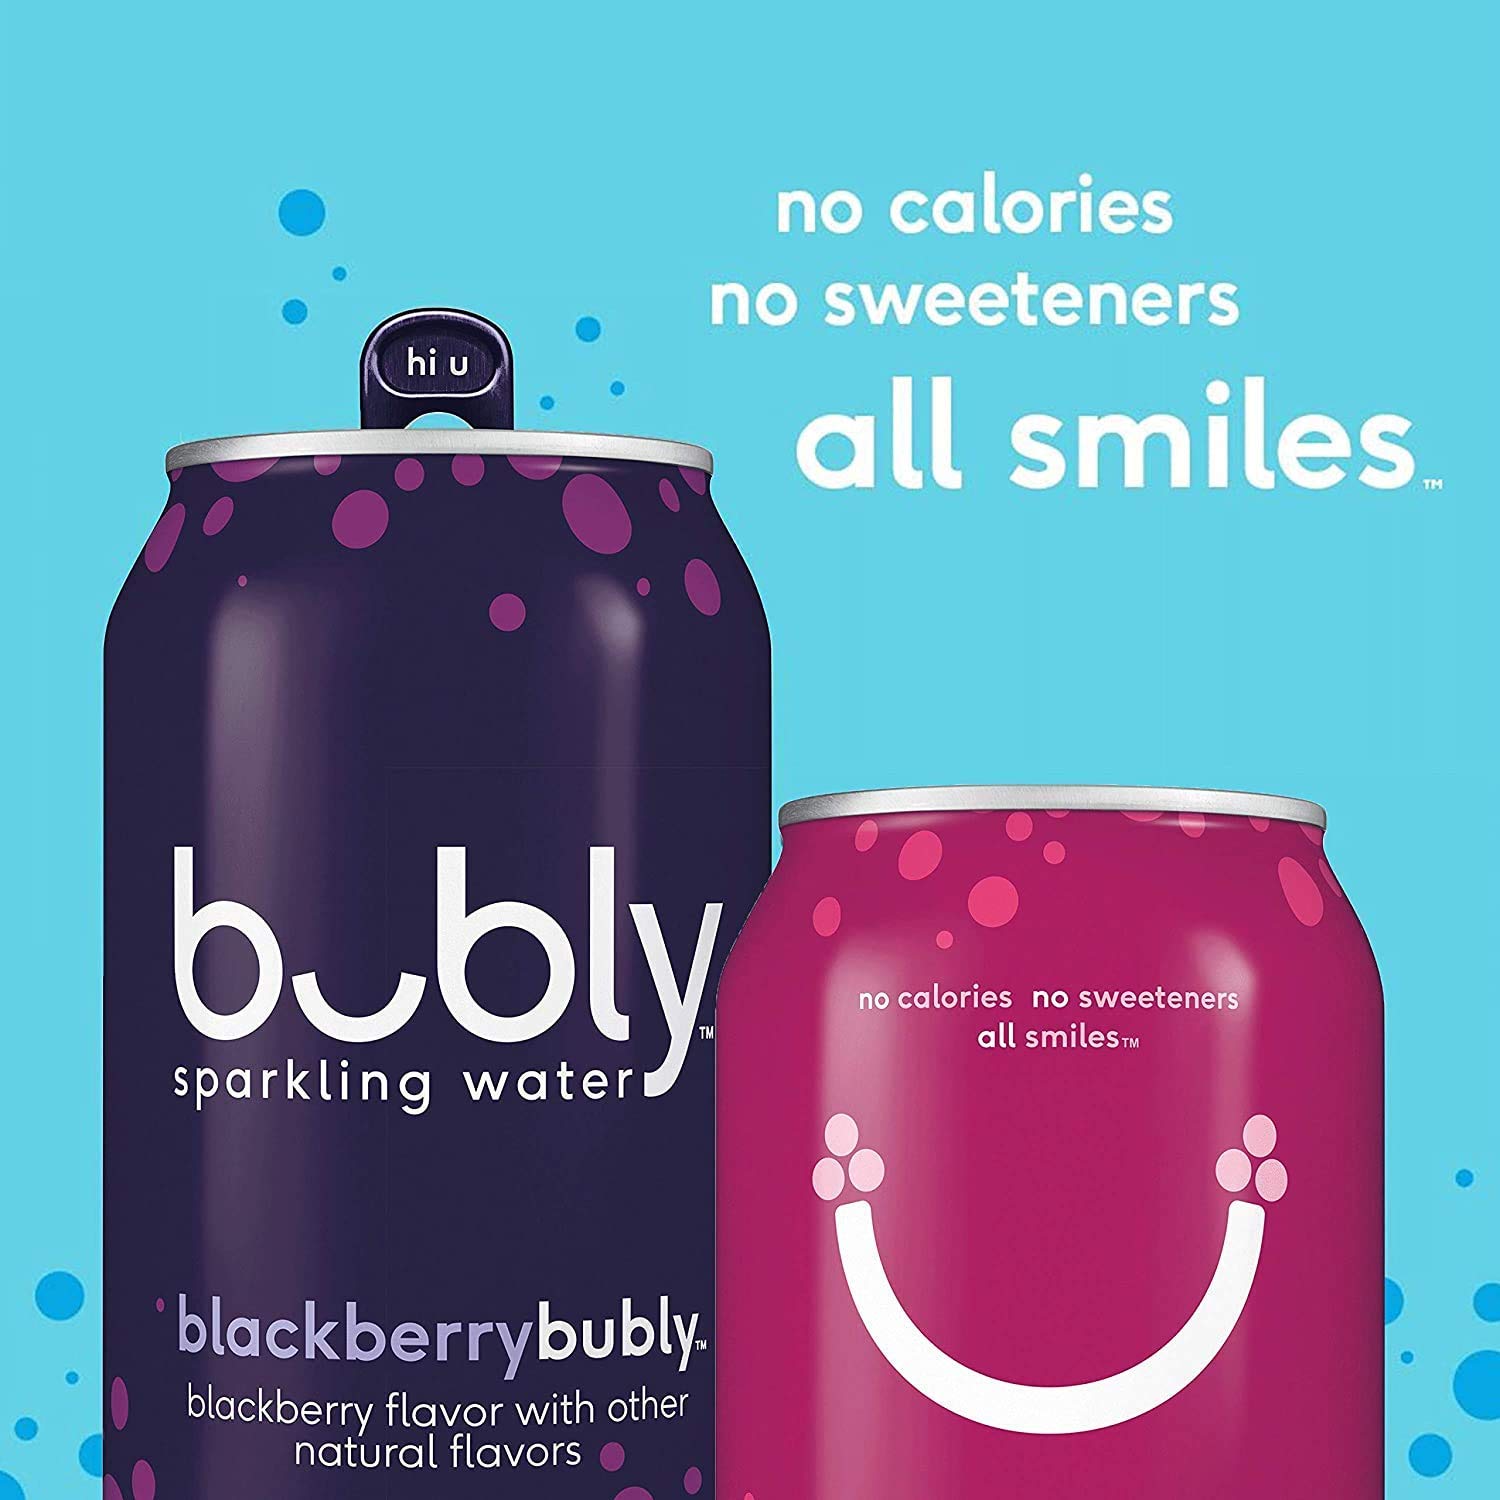 bubly Sparkling Water, 6 Flavor Variety Pack, 12 fl oz Cans (18 Pack), zero calories & zero sugar